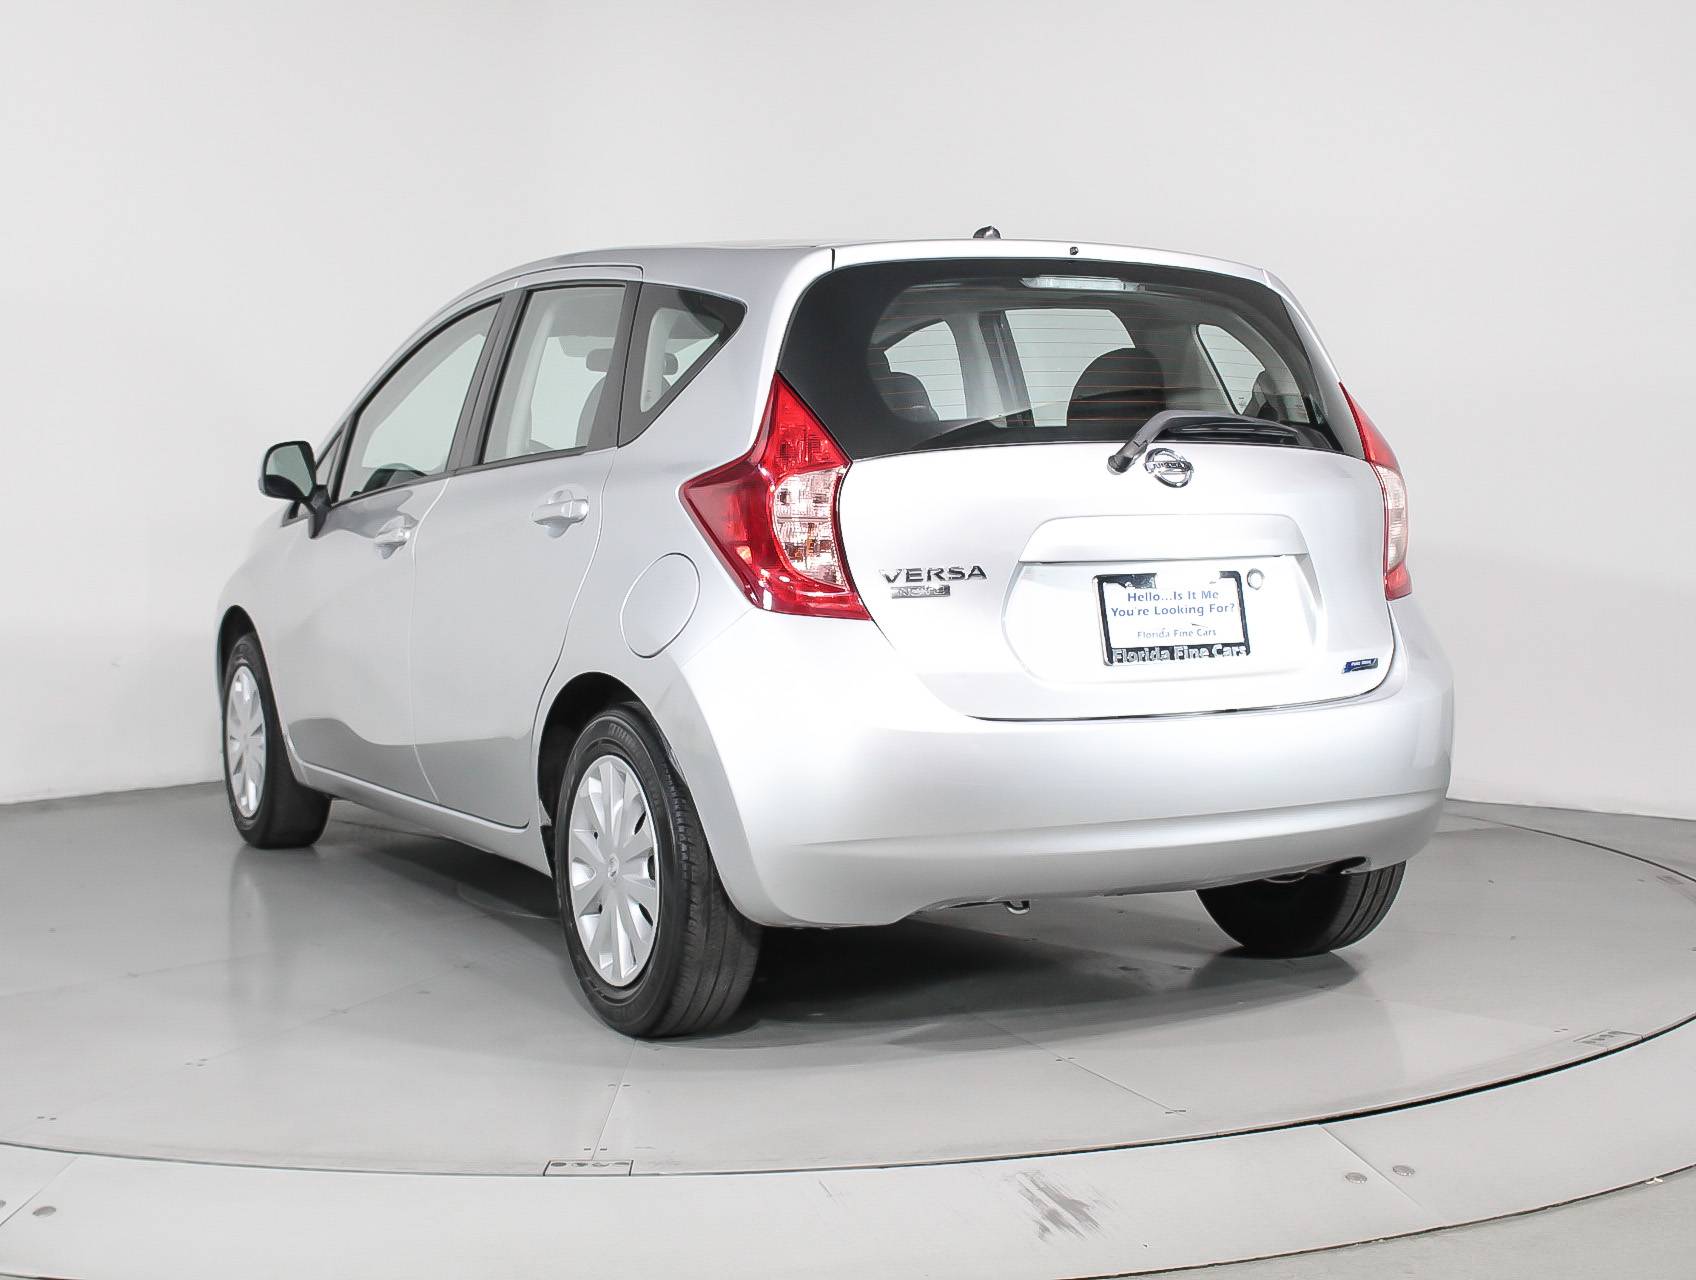 Florida Fine Cars - Used NISSAN VERSA NOTE 2014 MARGATE S